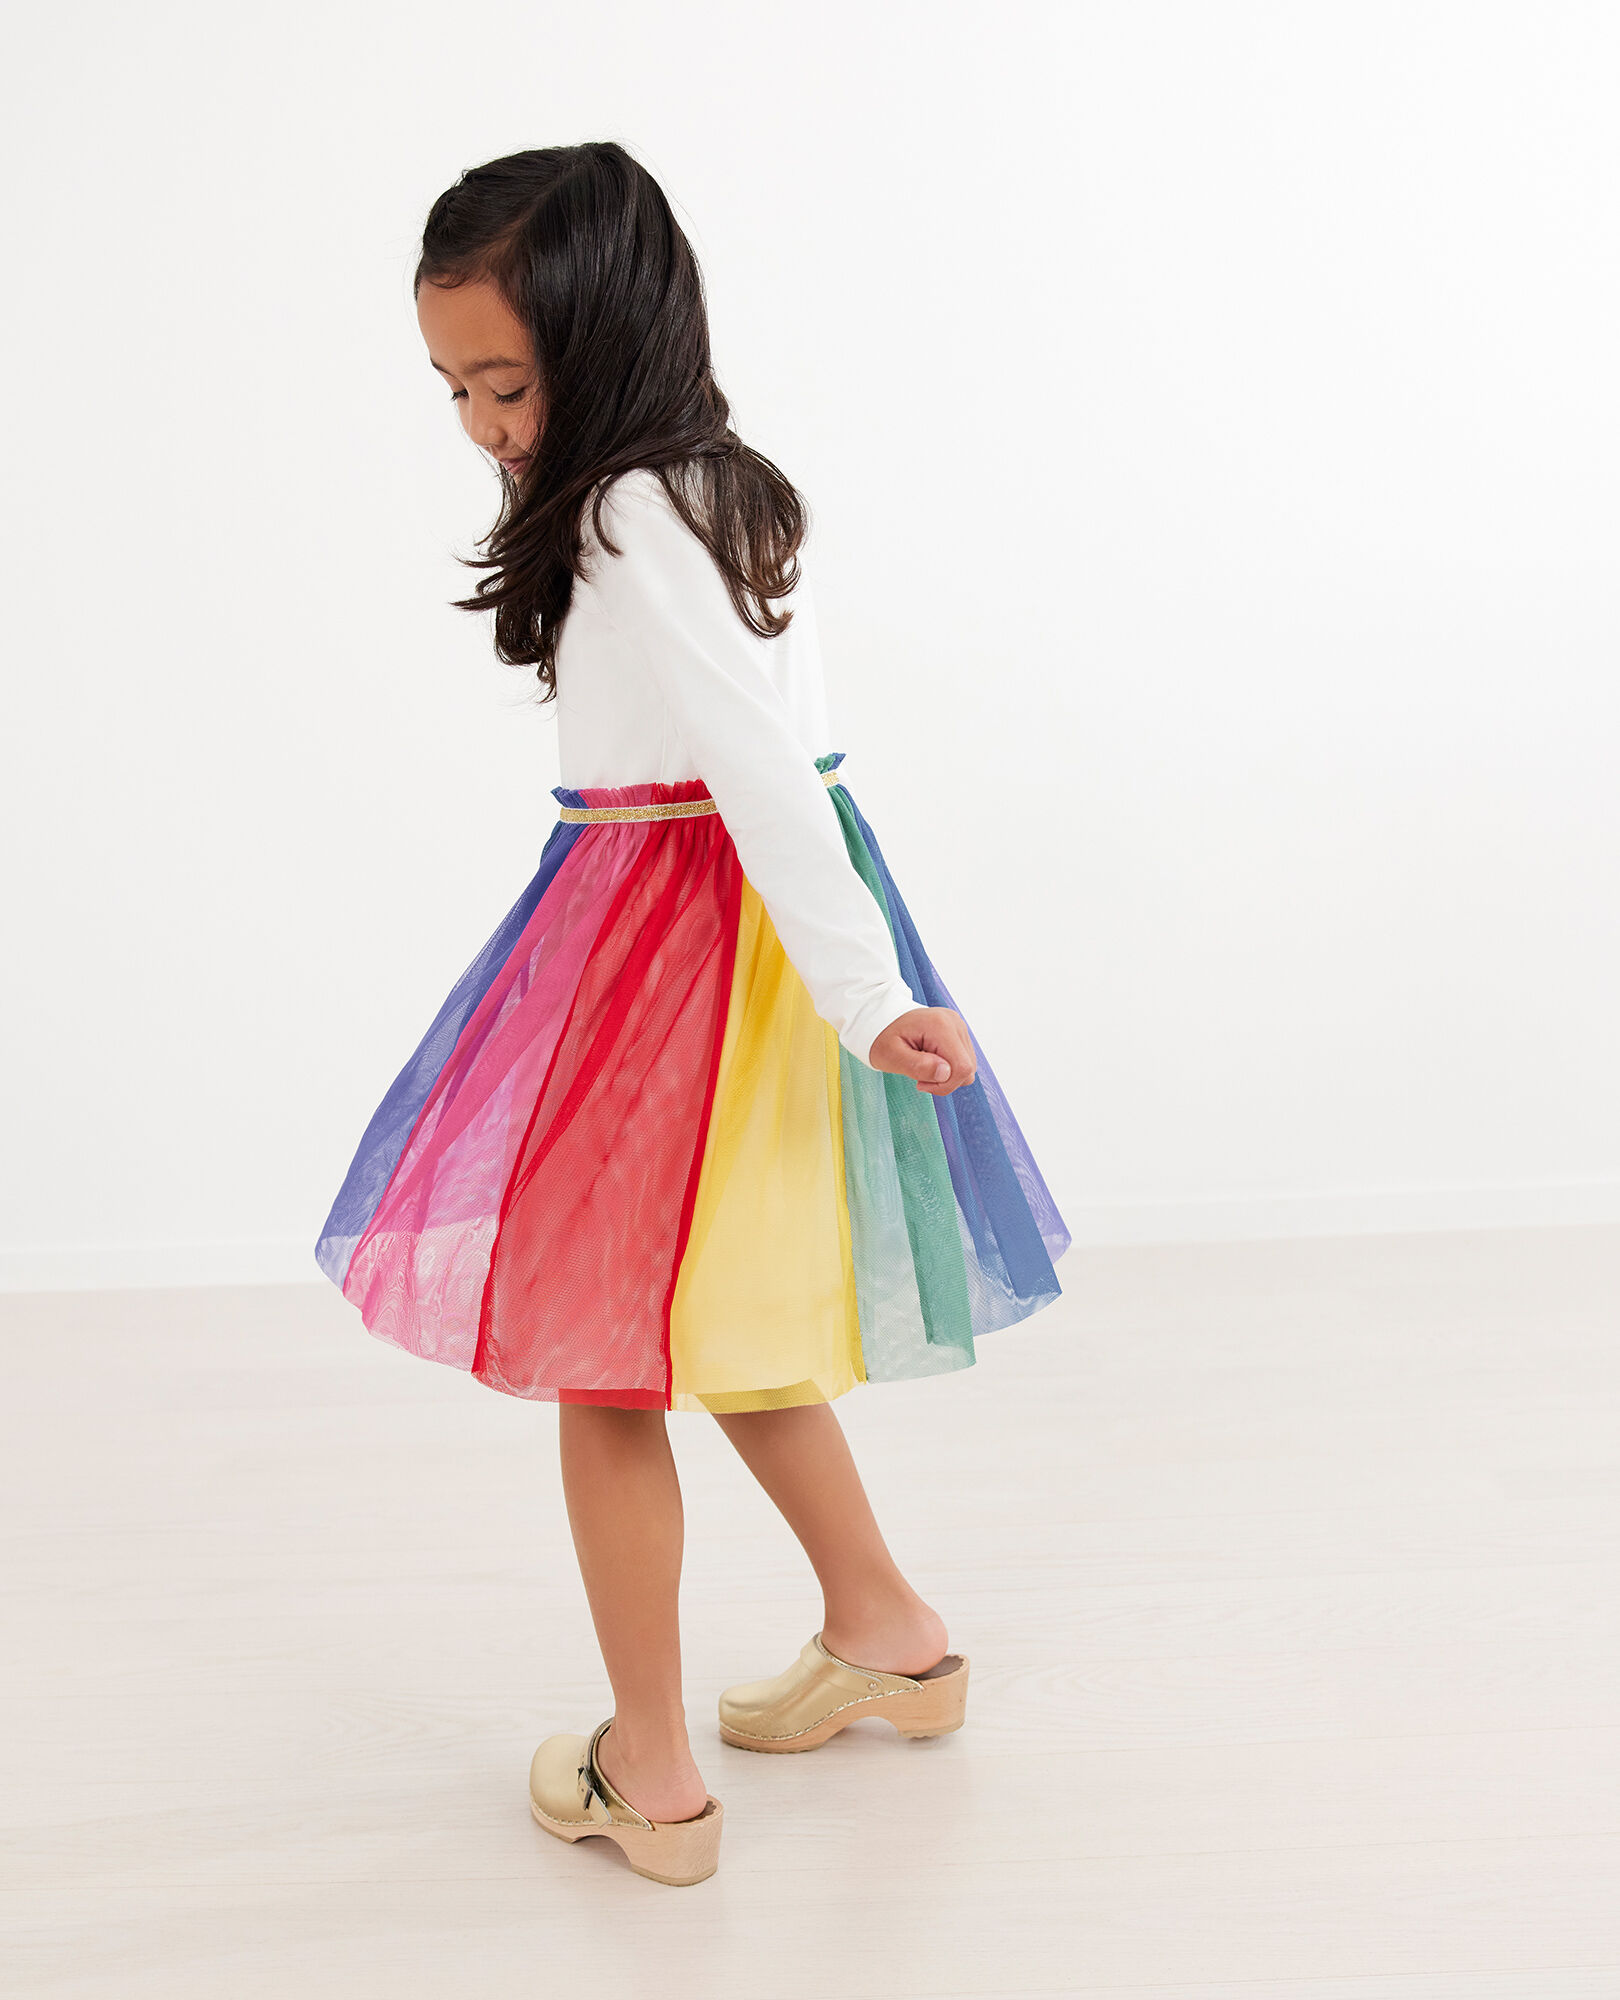 Rainbow Dress In Soft Tulle